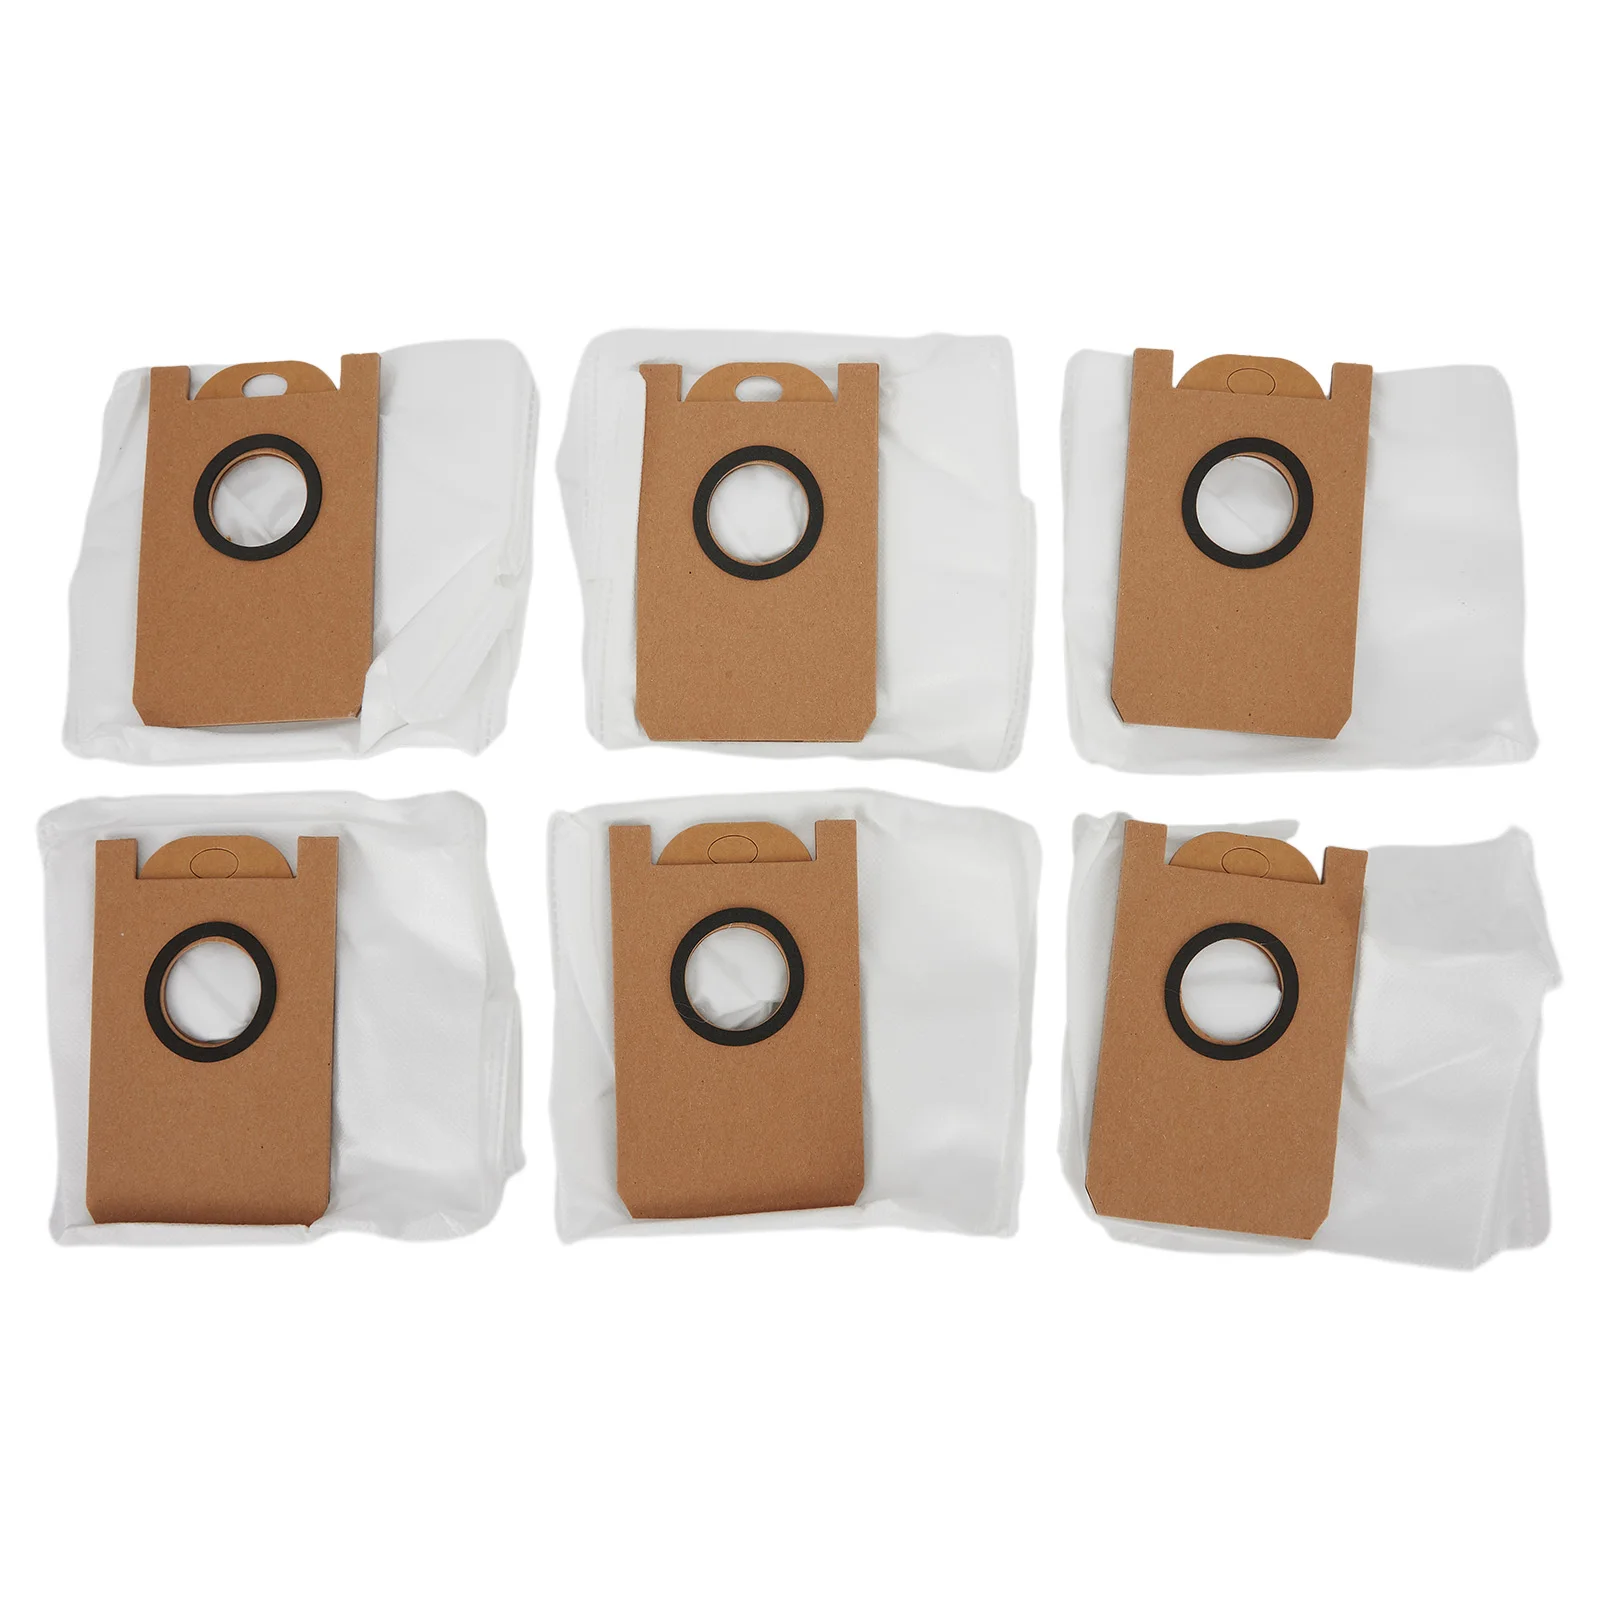 

6PCS Vacuum Cleaner Dust Bags Collector Set For Imou L11/Pro Robot Sweeper Spare Part Home Appliance Replacement Accessories